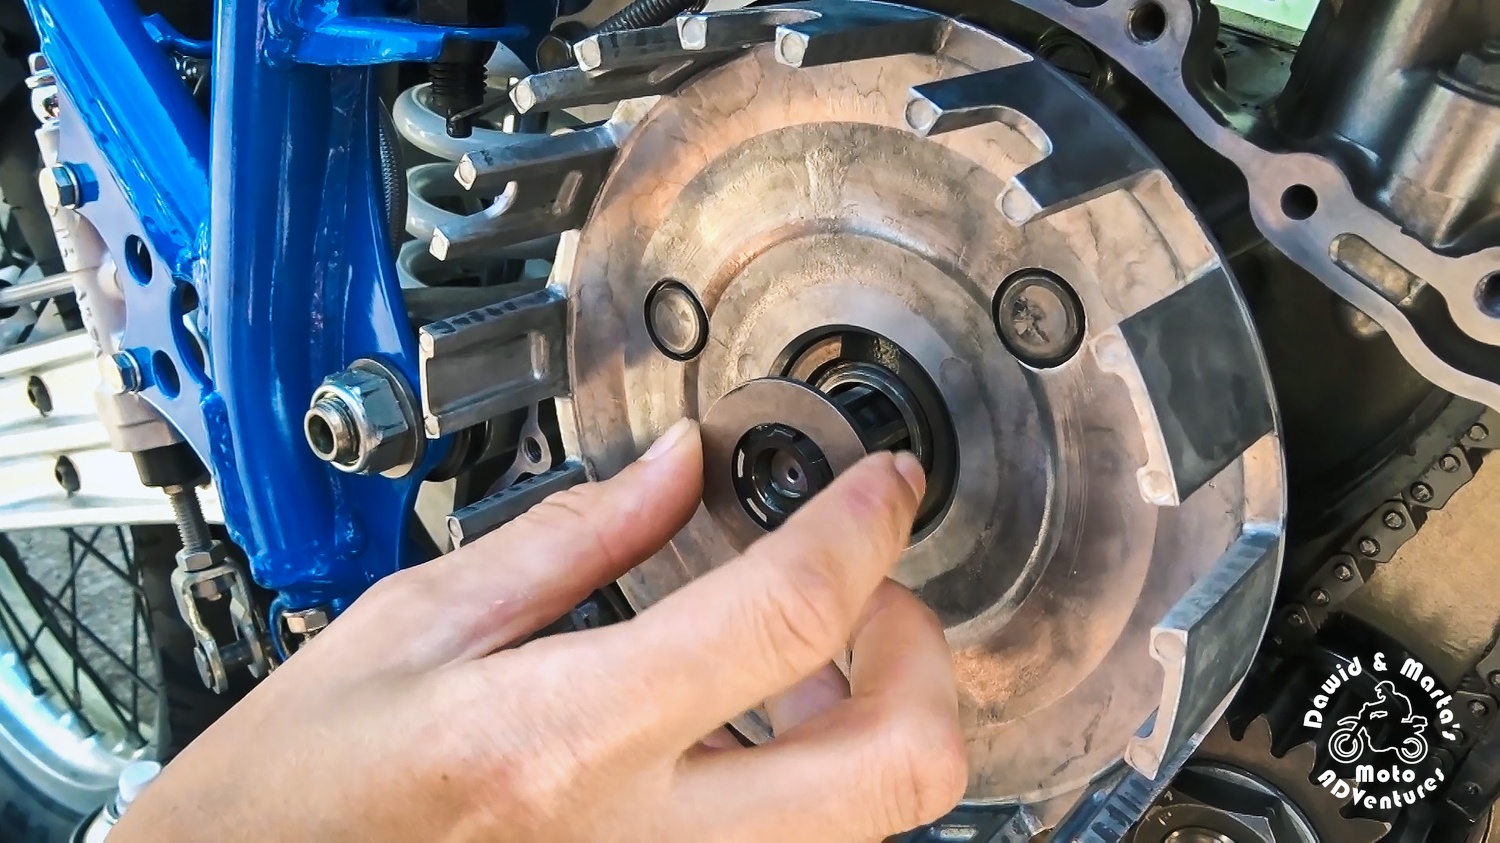 Placing the clutch bracket spacer washer